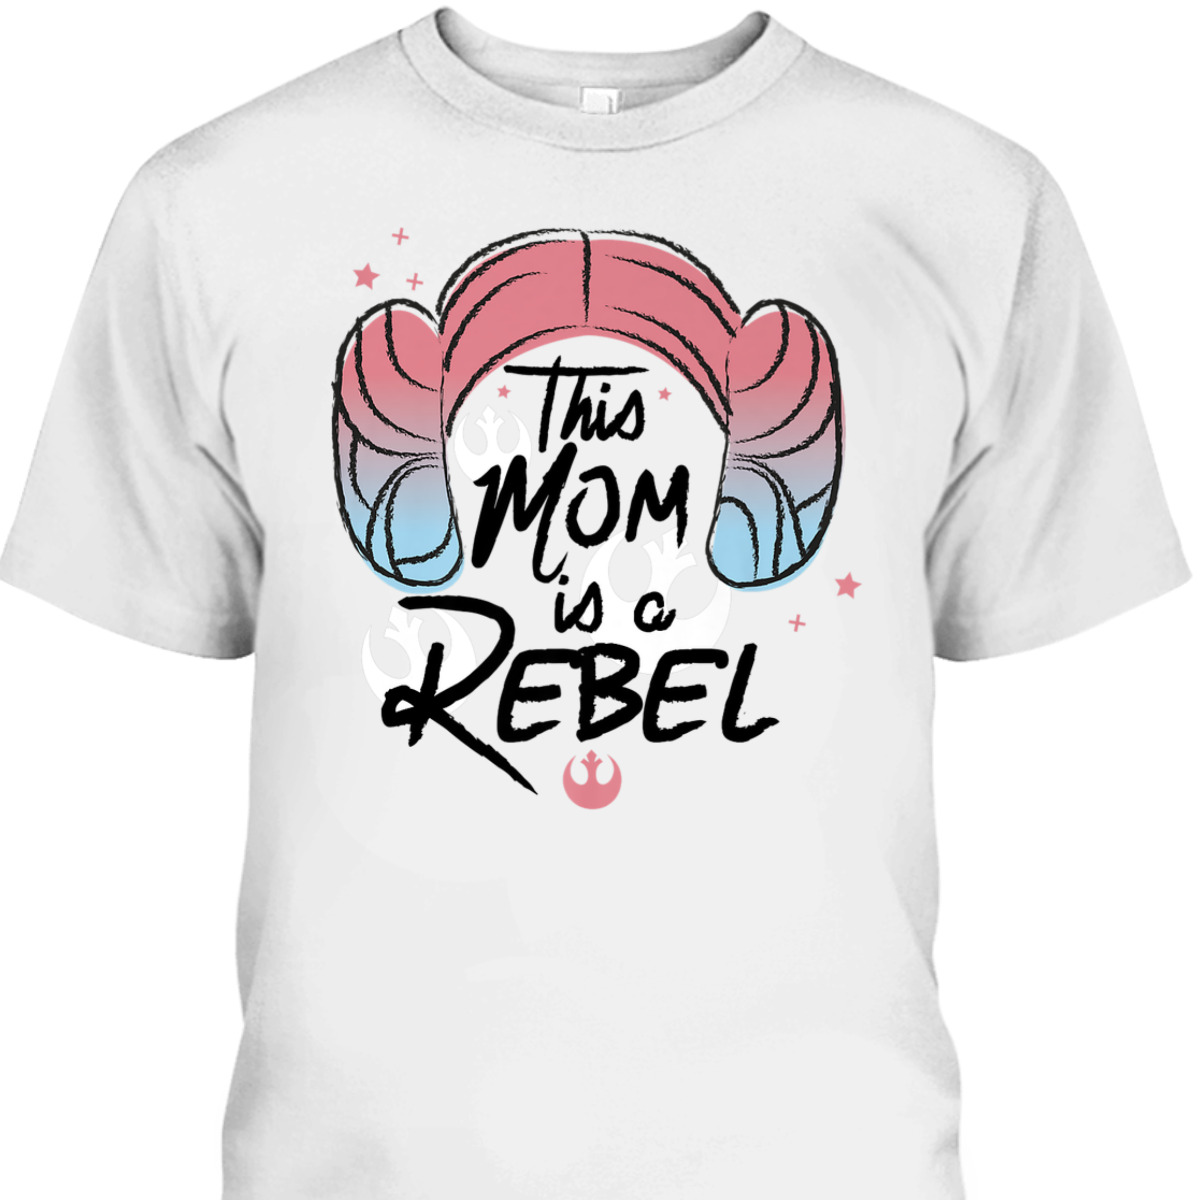 Star Wars Mother's Day T-Shirt This Mom Is A Rebel Princess Leia Hair